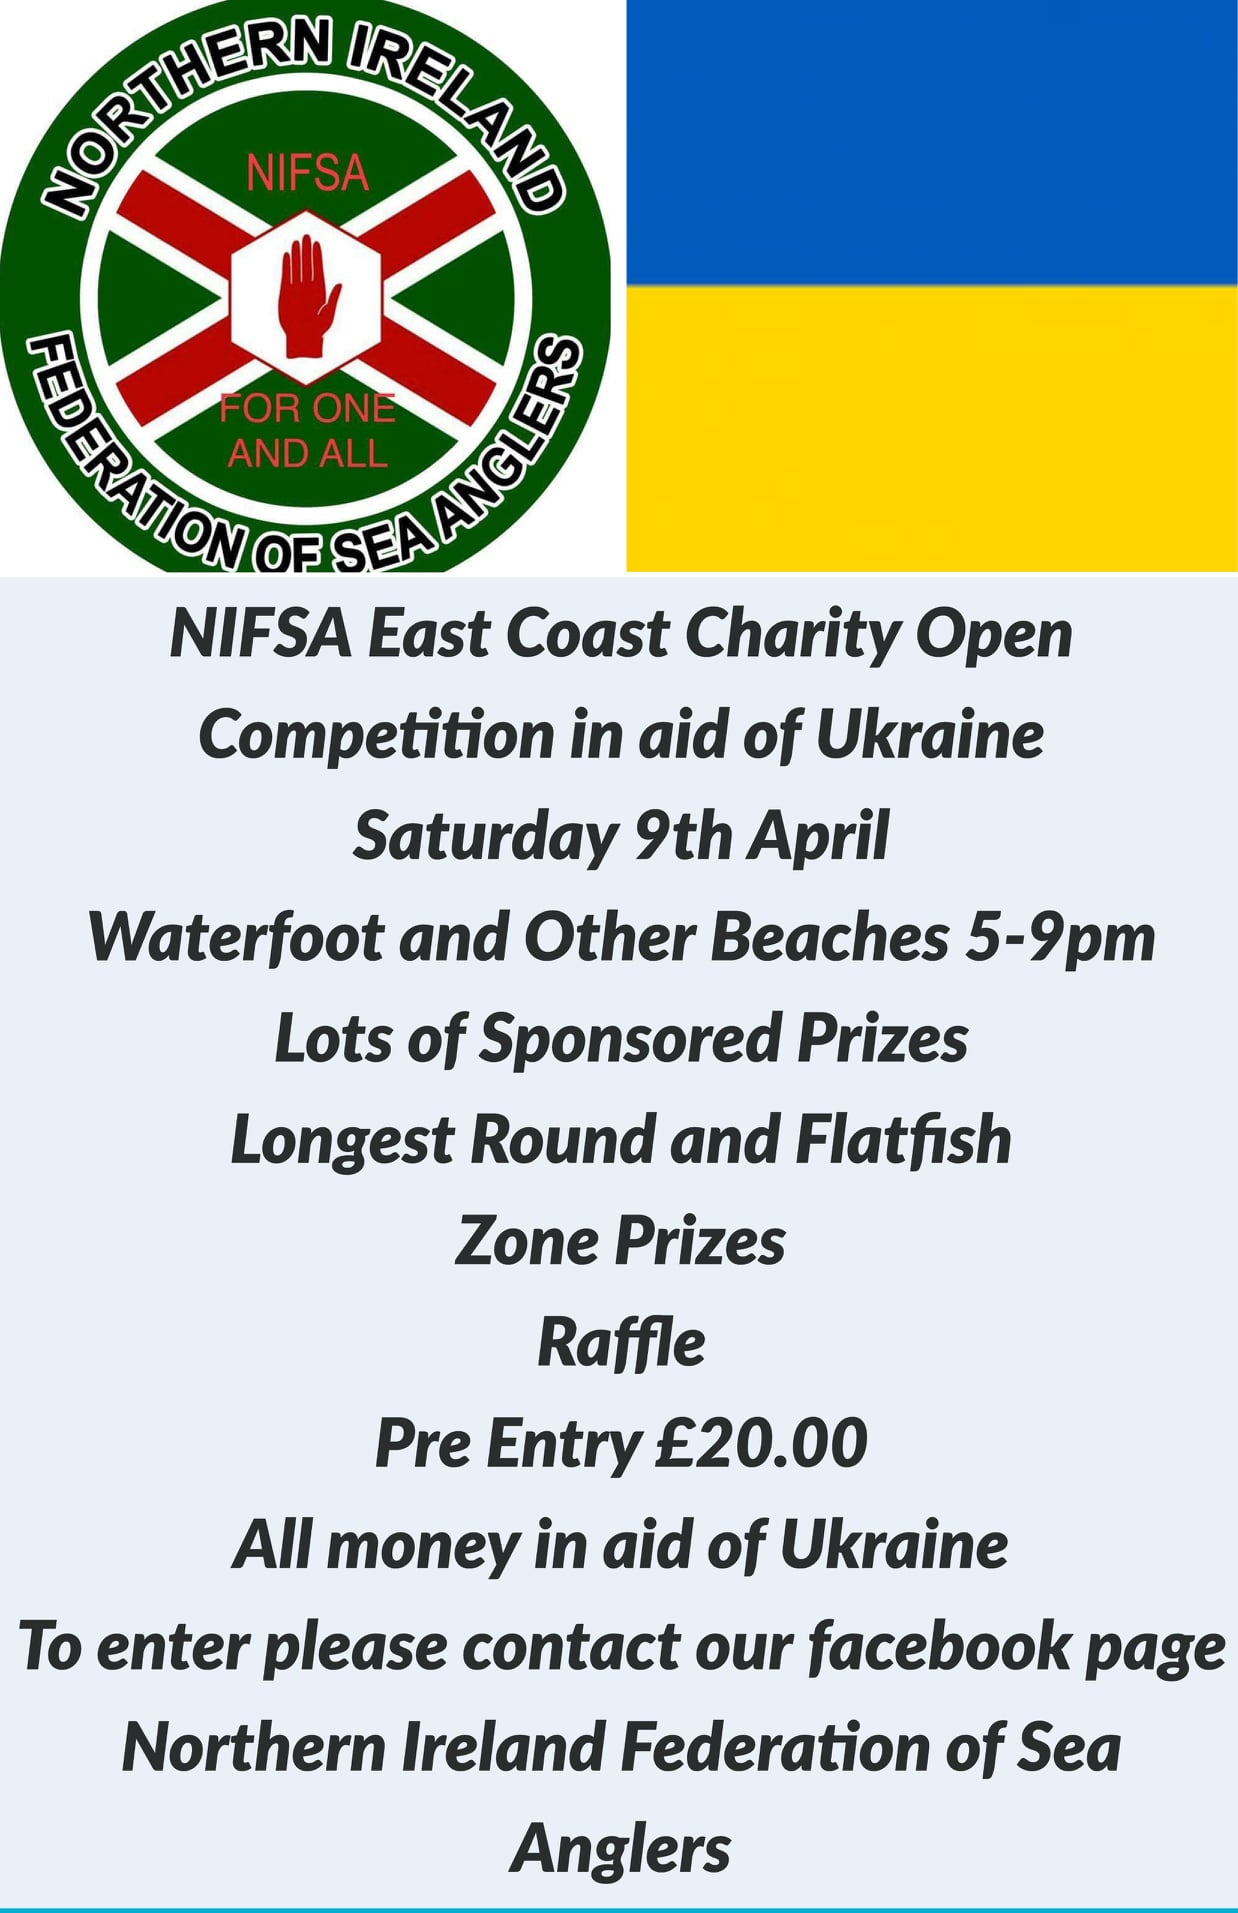 NIFSA are having a charity match with all proceeds going towards causes in Ukraine